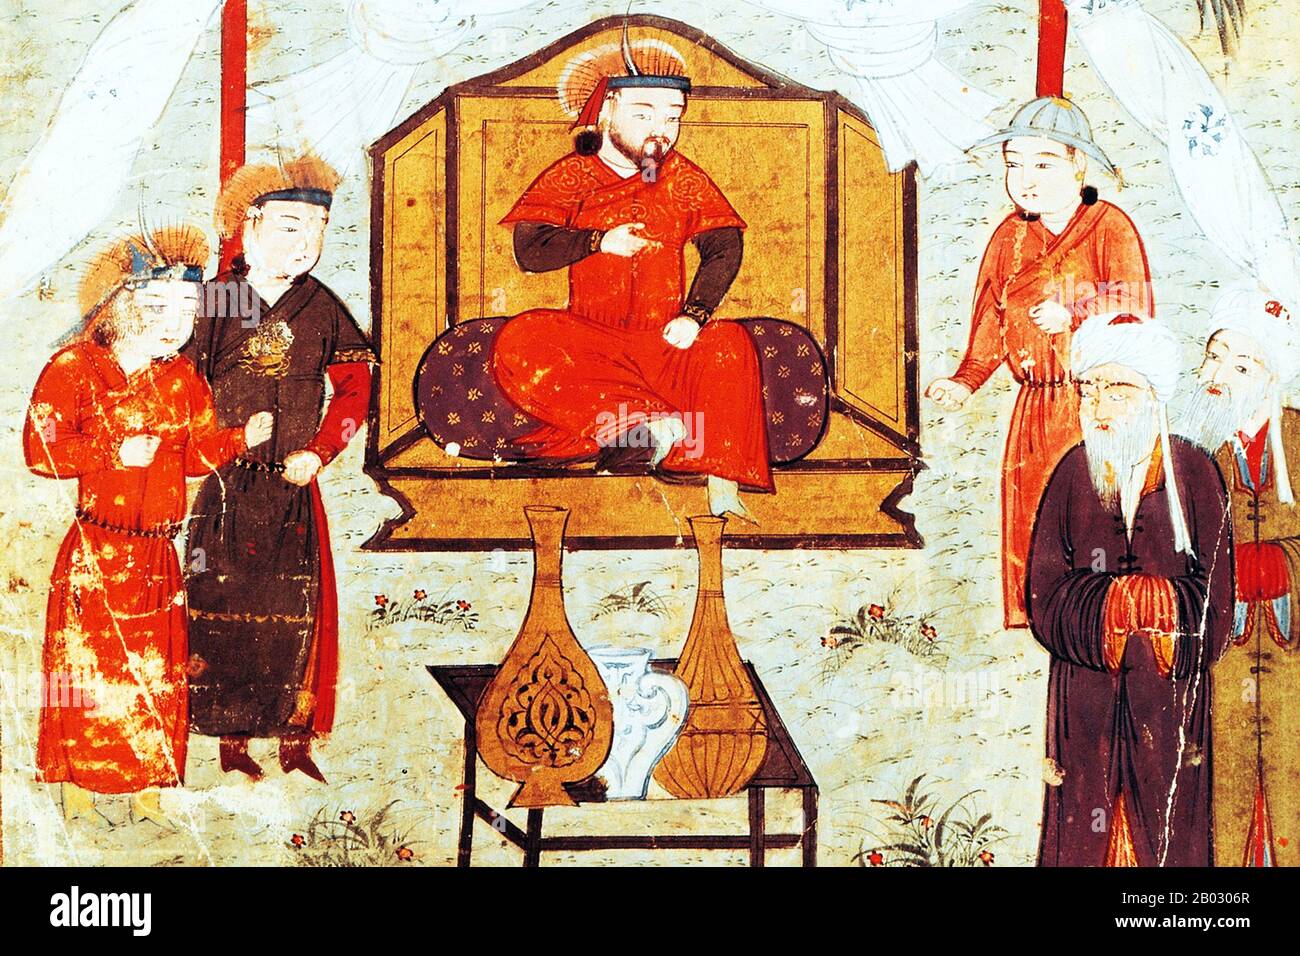 Hulagu Khan, also known as Hulegu or Halaku (c. 1217 – 8 February 1265), was a Mongol ruler who conquered much of Southwest Asia. Son of Tolui and the Kerait princess Sorghaghtani Beki, he was a grandson of Genghis Khan, and the brother of Arik Boke, Mongke Khan and Kublai Khan.  Hulagu's army greatly expanded the southwestern portion of the Mongol Empire, founding the Ilkhanate of Persia, a precursor to the eventual Safavid dynasty, and then the modern state of Iran. Stock Photo